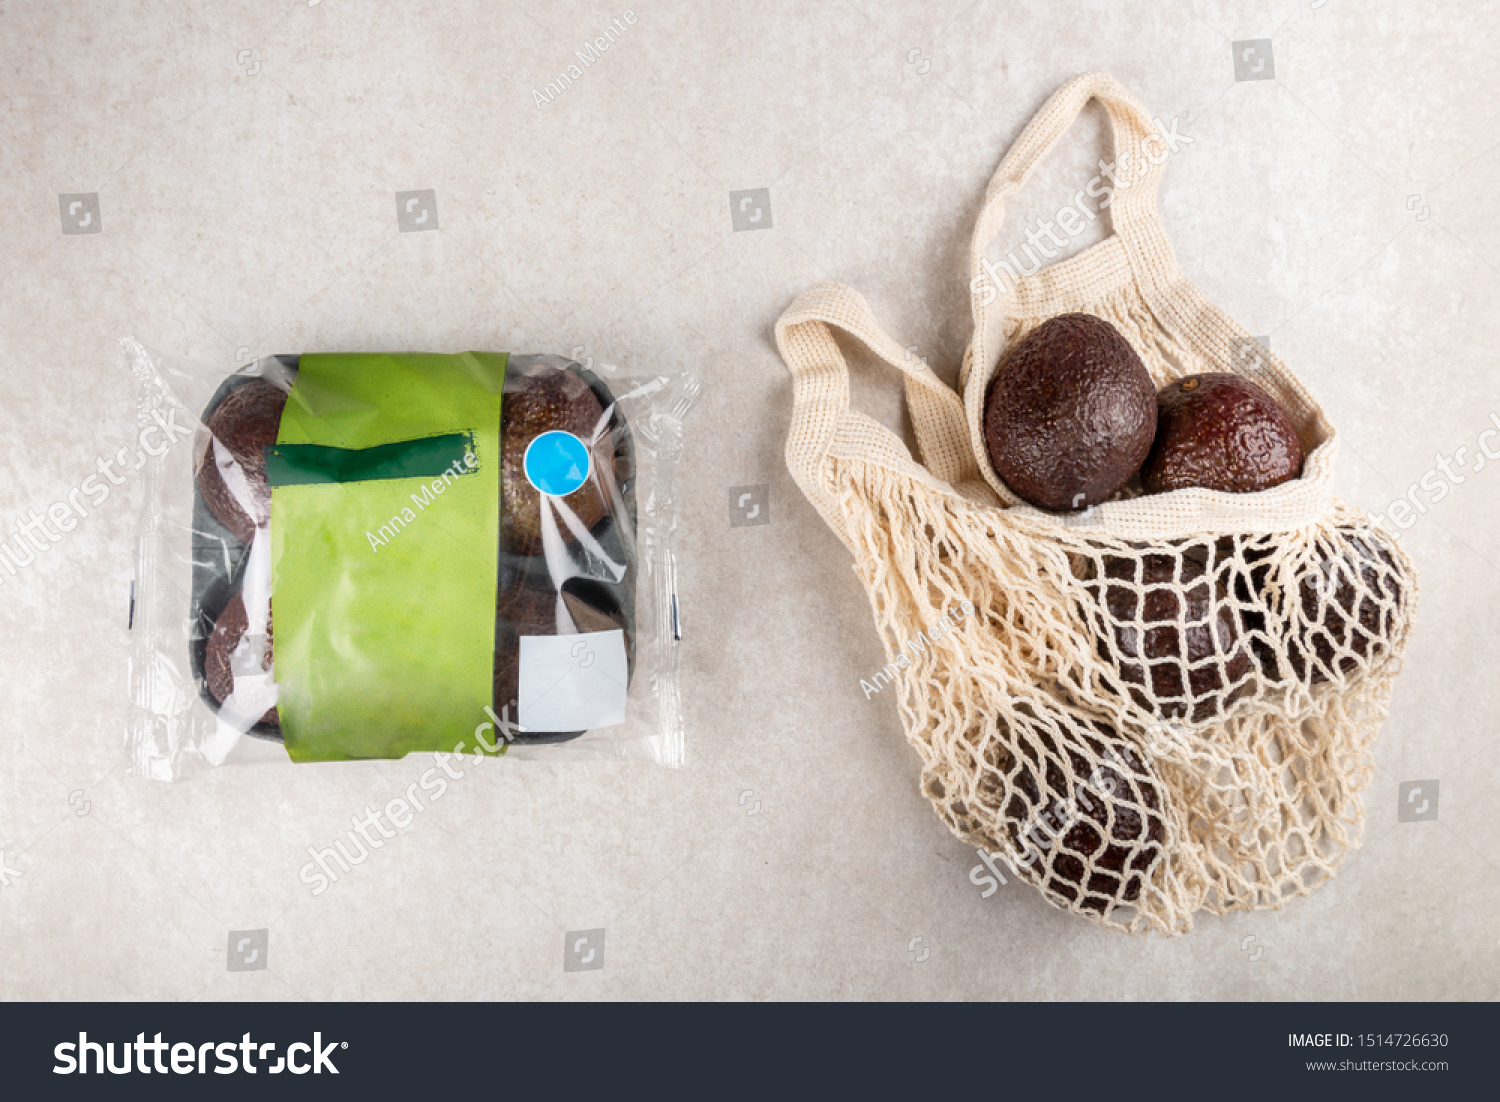 Cotton String Mesh Bag with Avocado VS prepacked avocado, Ecological zero waste and say no to plastic concepts #1514726630